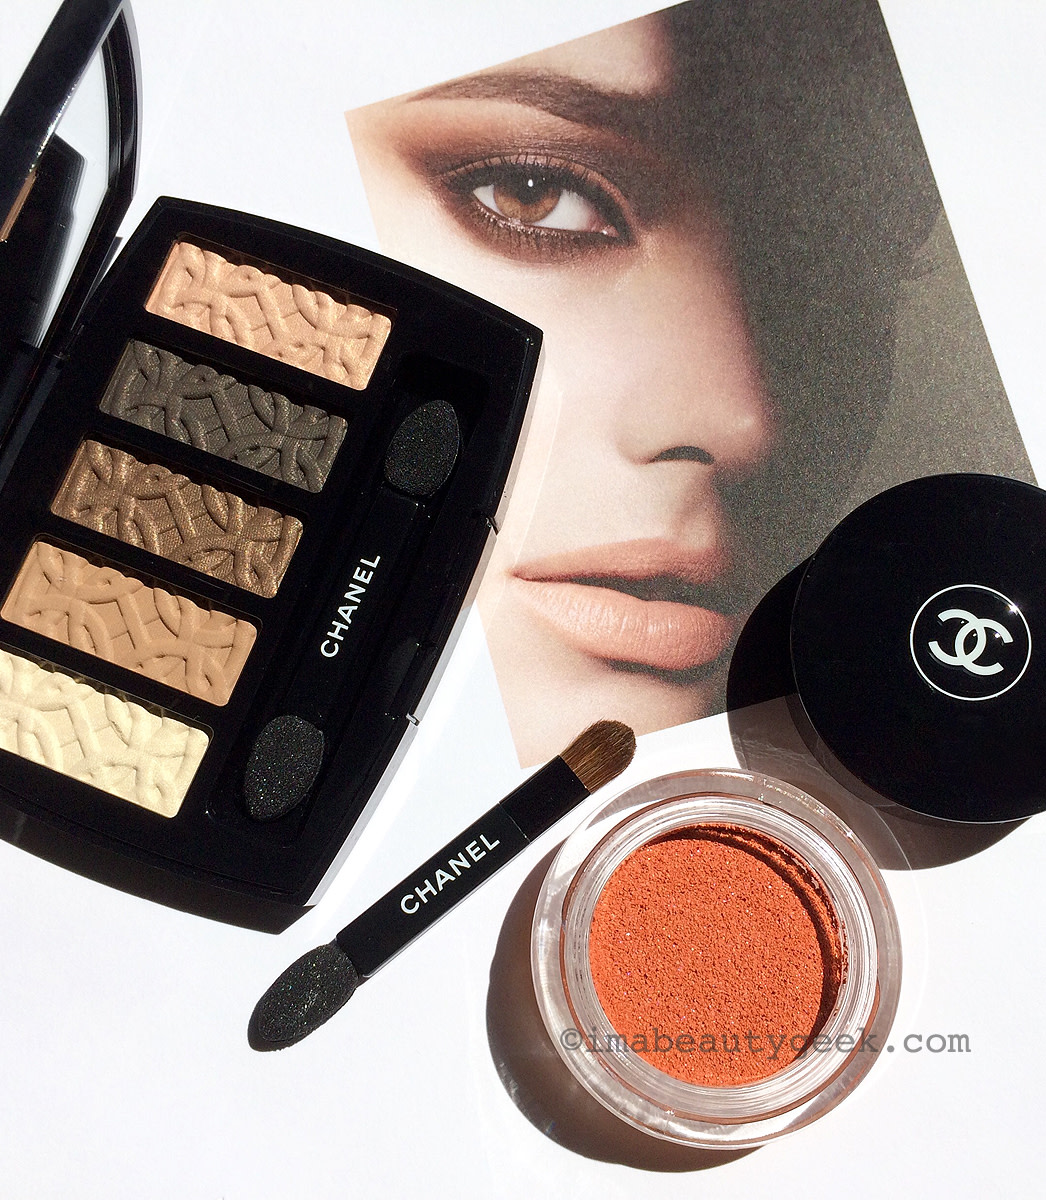 CHANEL FALL 2015 MAKEUP: LES AUTOMNALES COLLECTION - Beautygeeks